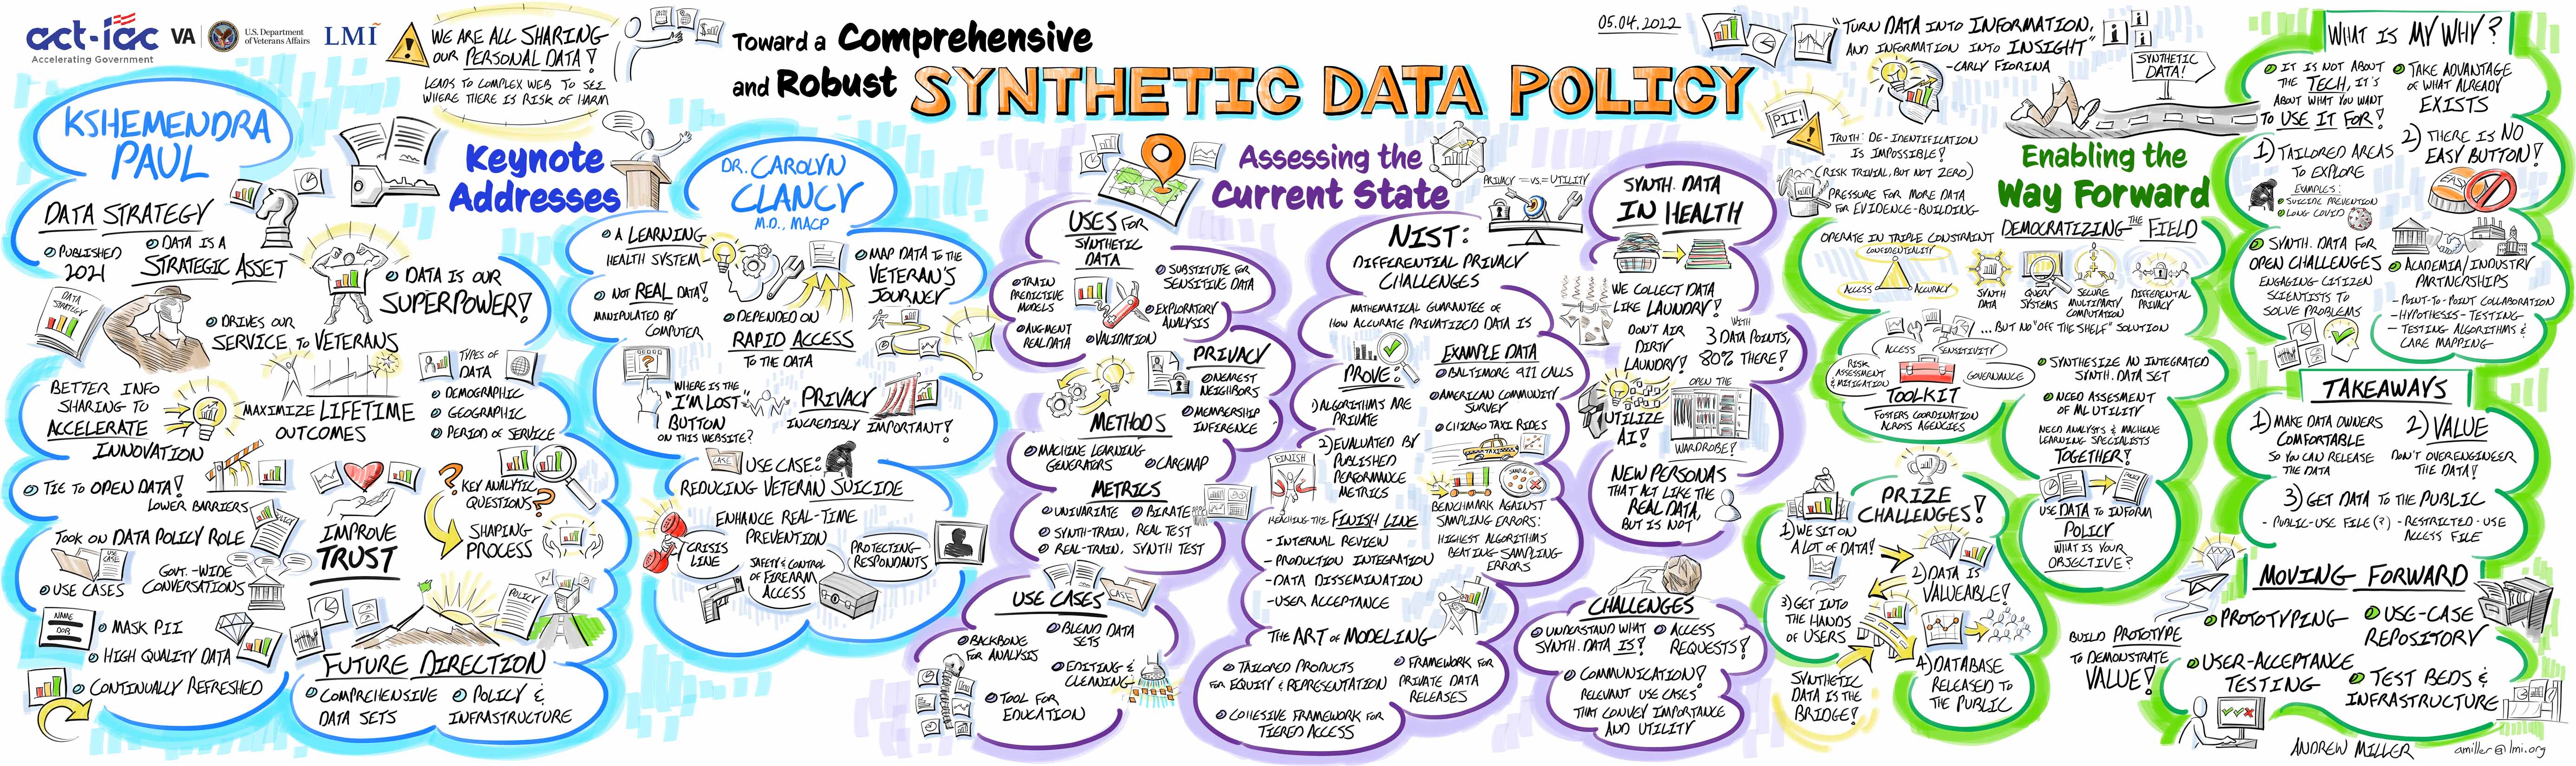 synthetic data policy drawing